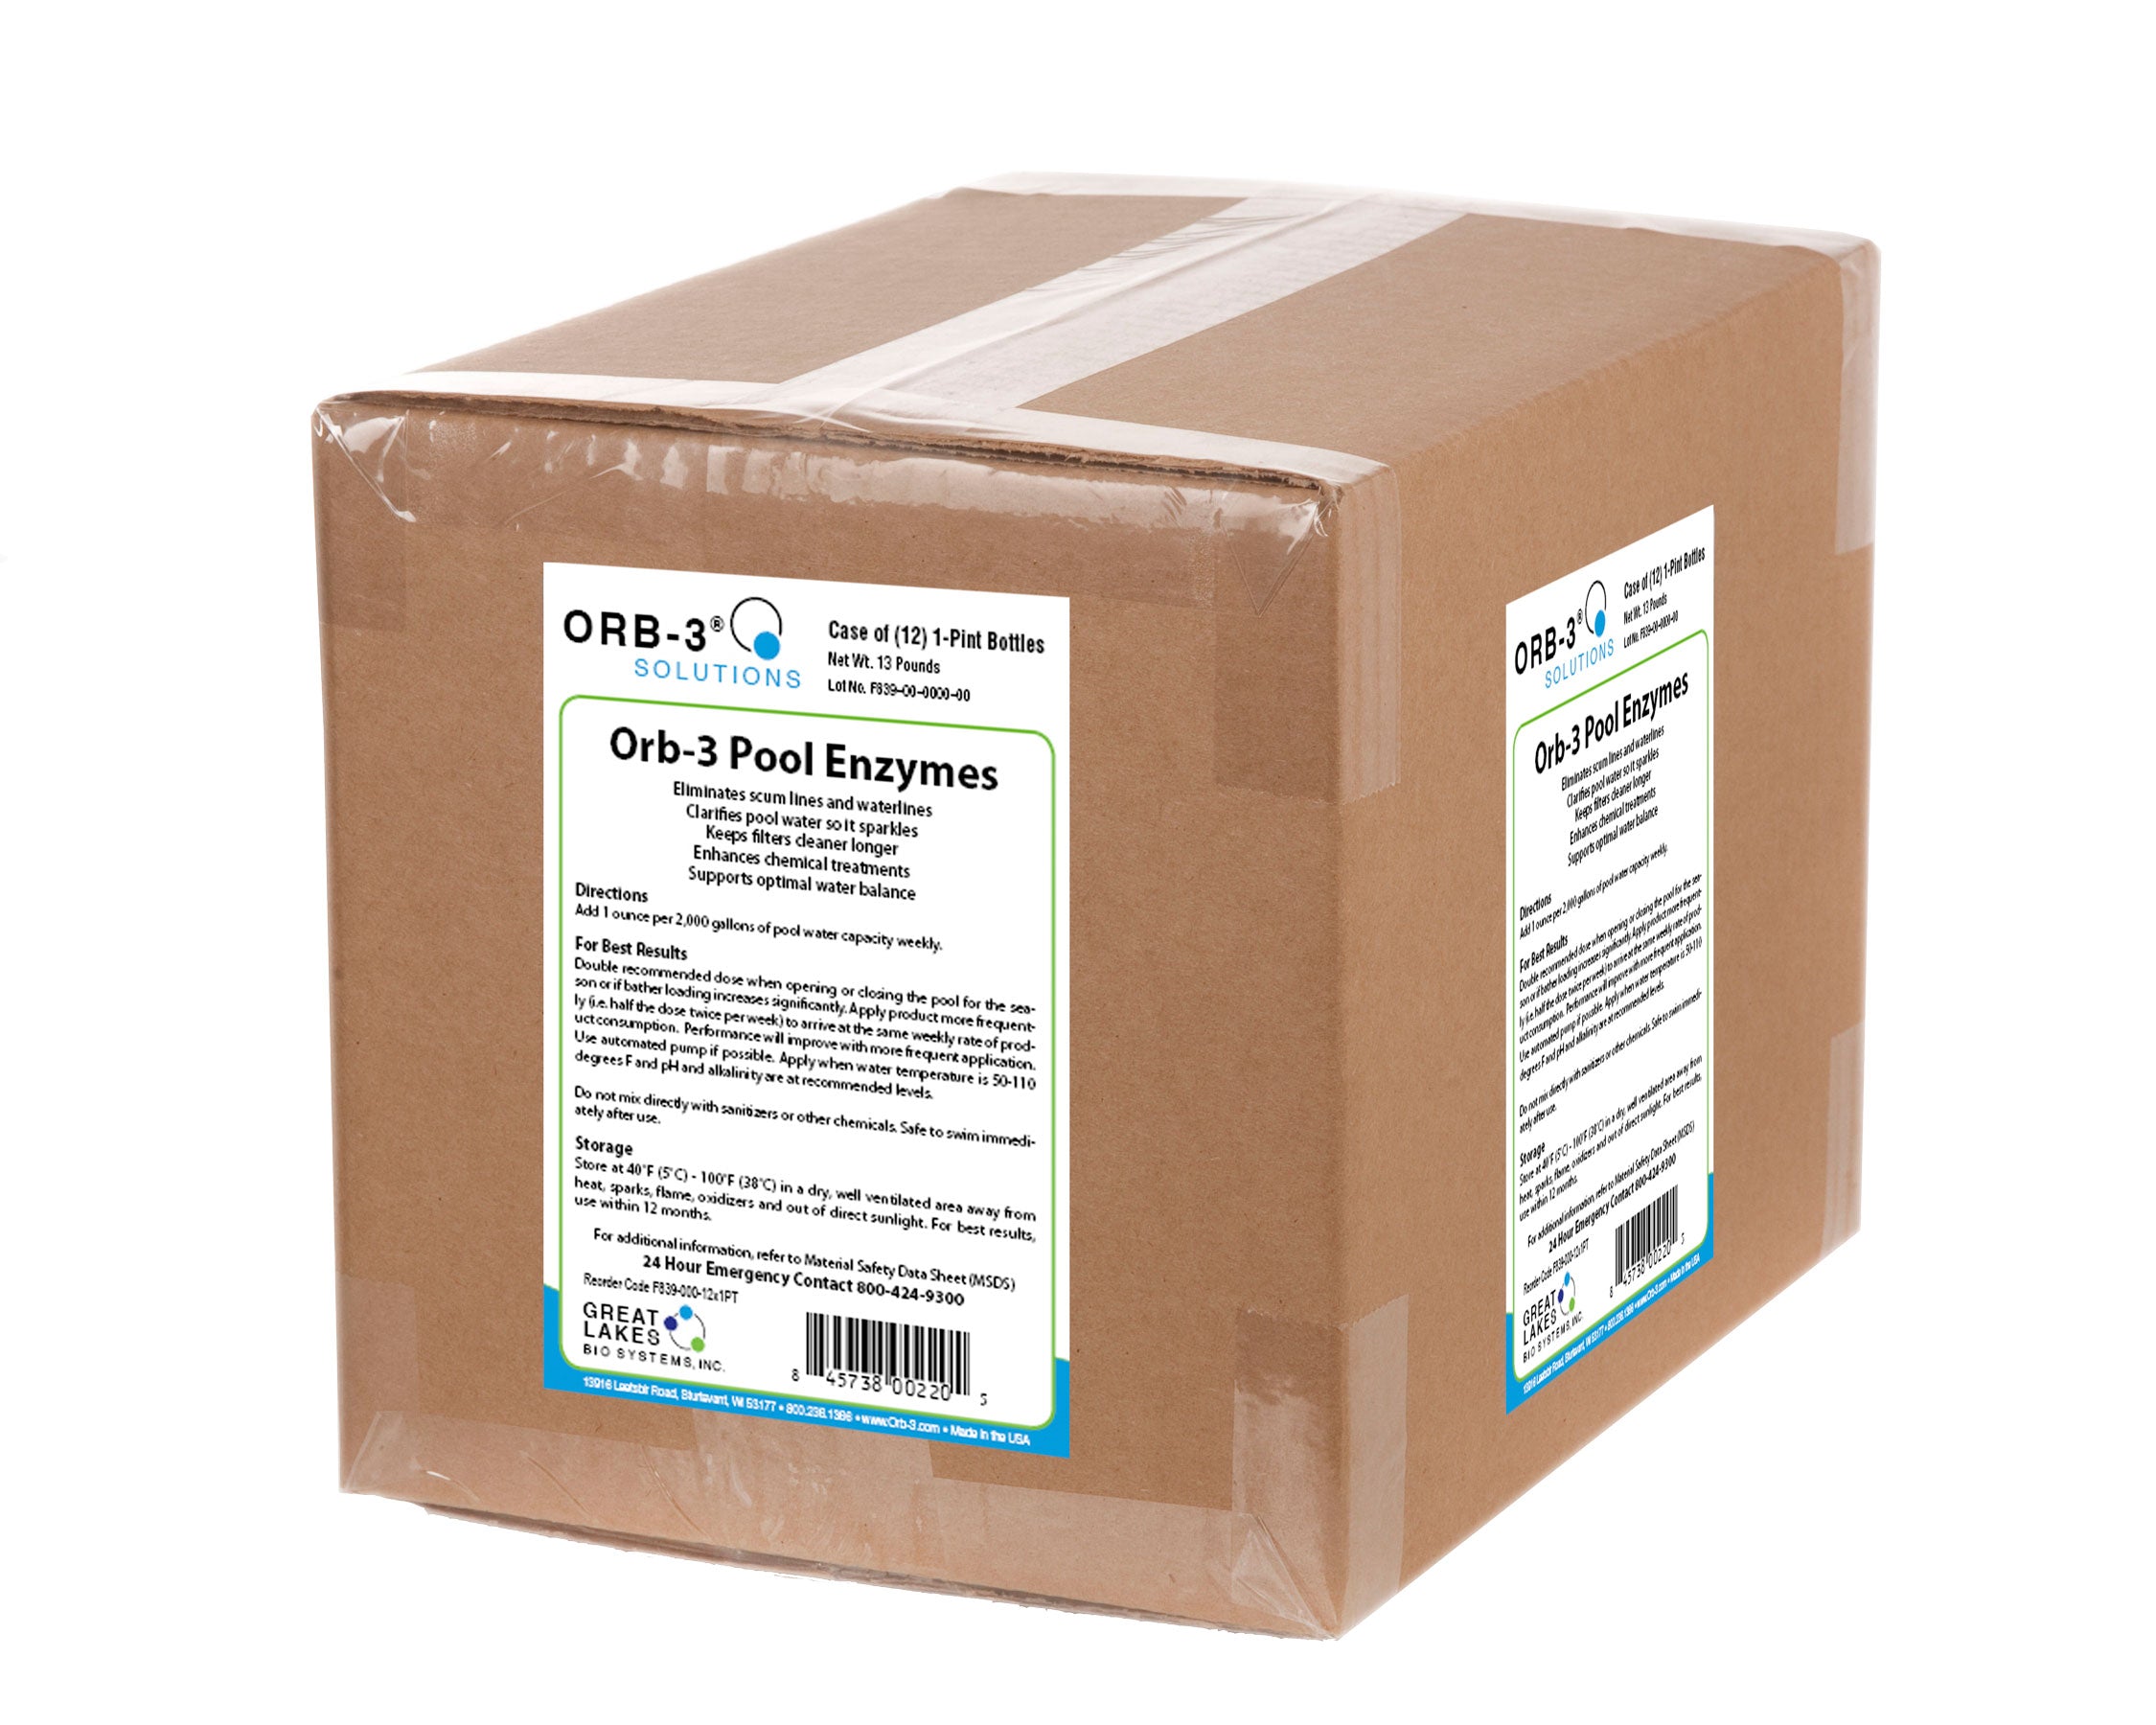 Orb-3 Pool Enzymes in a Case of 12 Pints